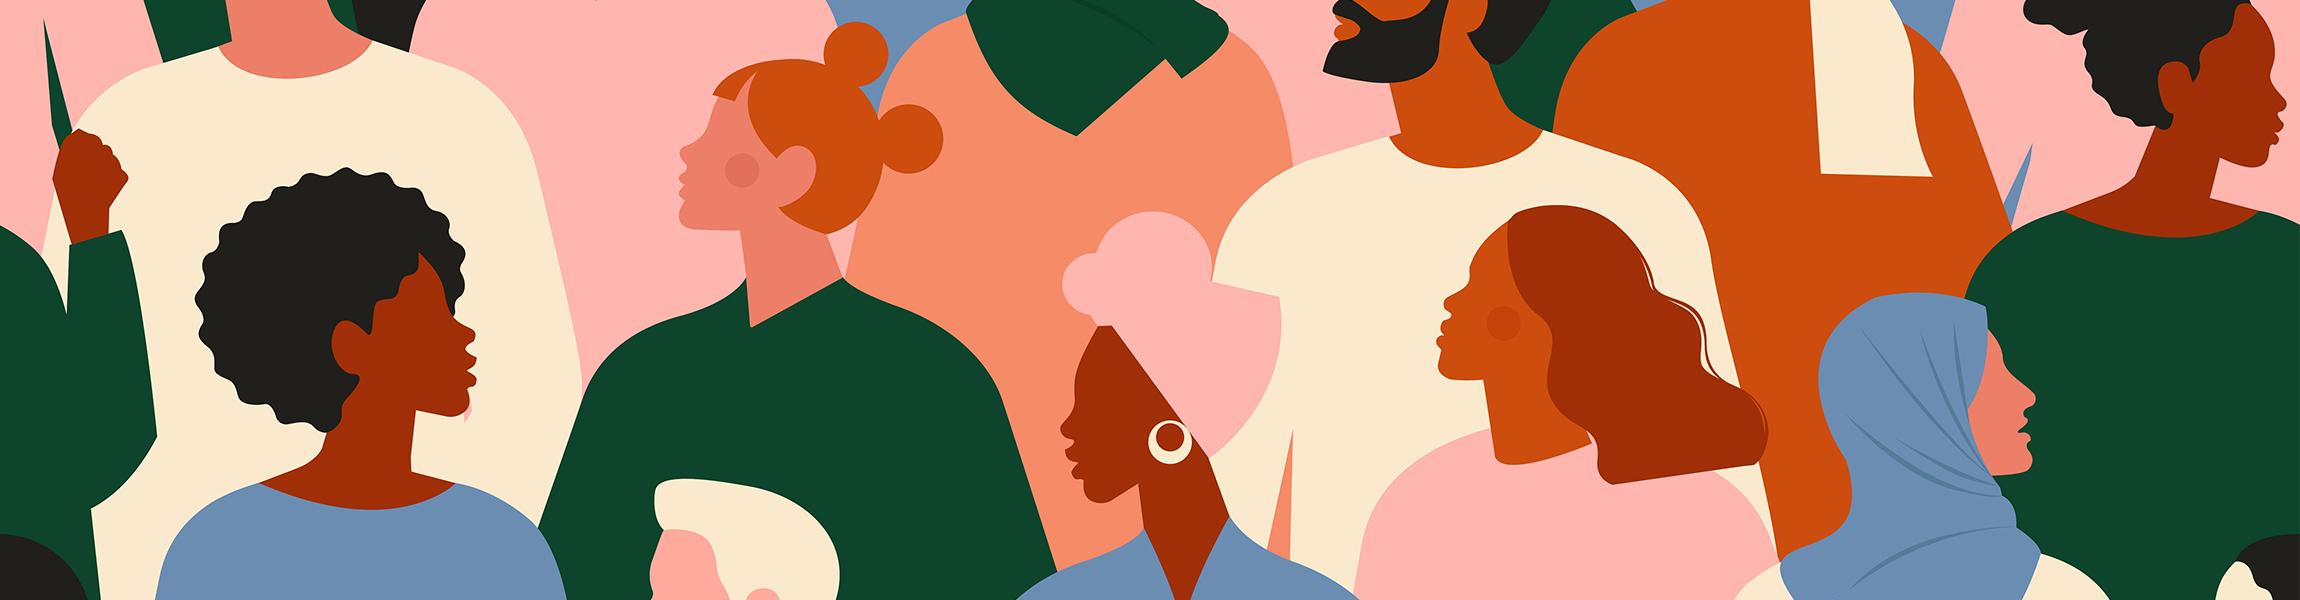 A flat, stylized illustration of many people of different races assembled; some have big curly hair, some have hair tied up, some wear hijabs and headdresses, while other have beards and short hair.